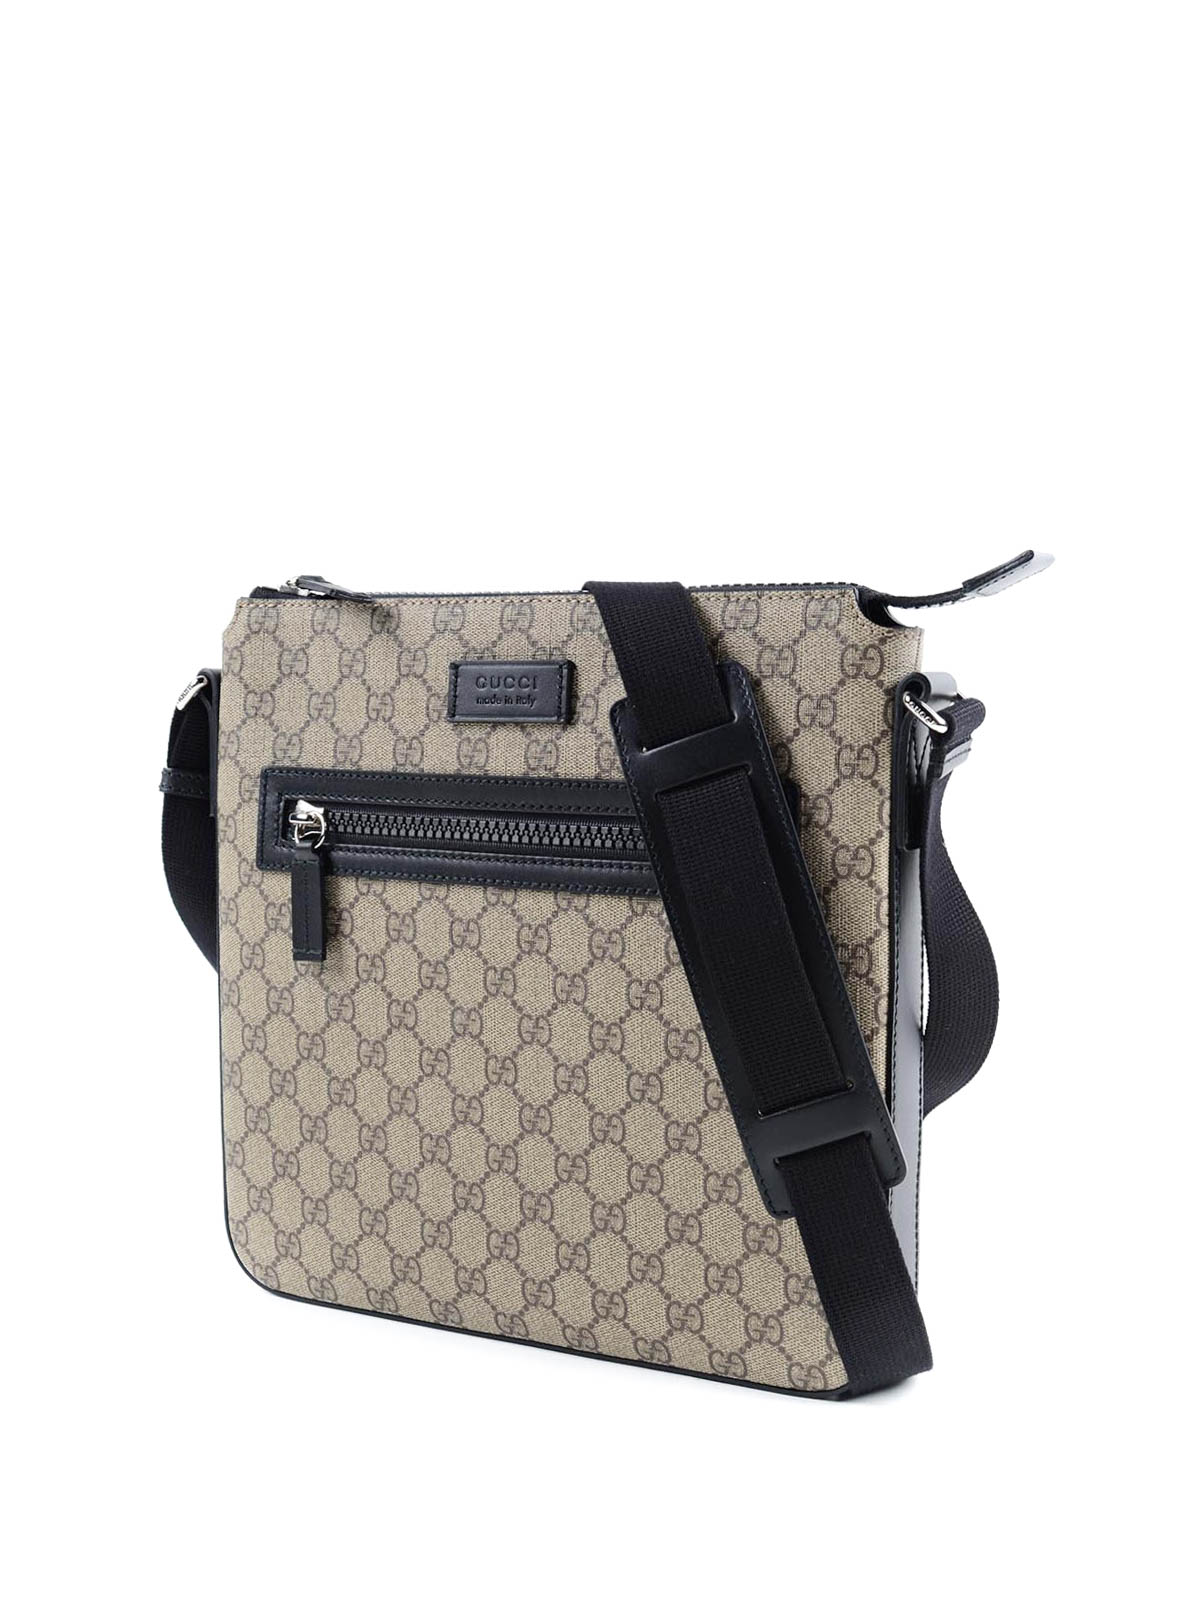 GG Supreme crossbody by Gucci - cross body bags | Shop online at www.paulmartinsmith.com